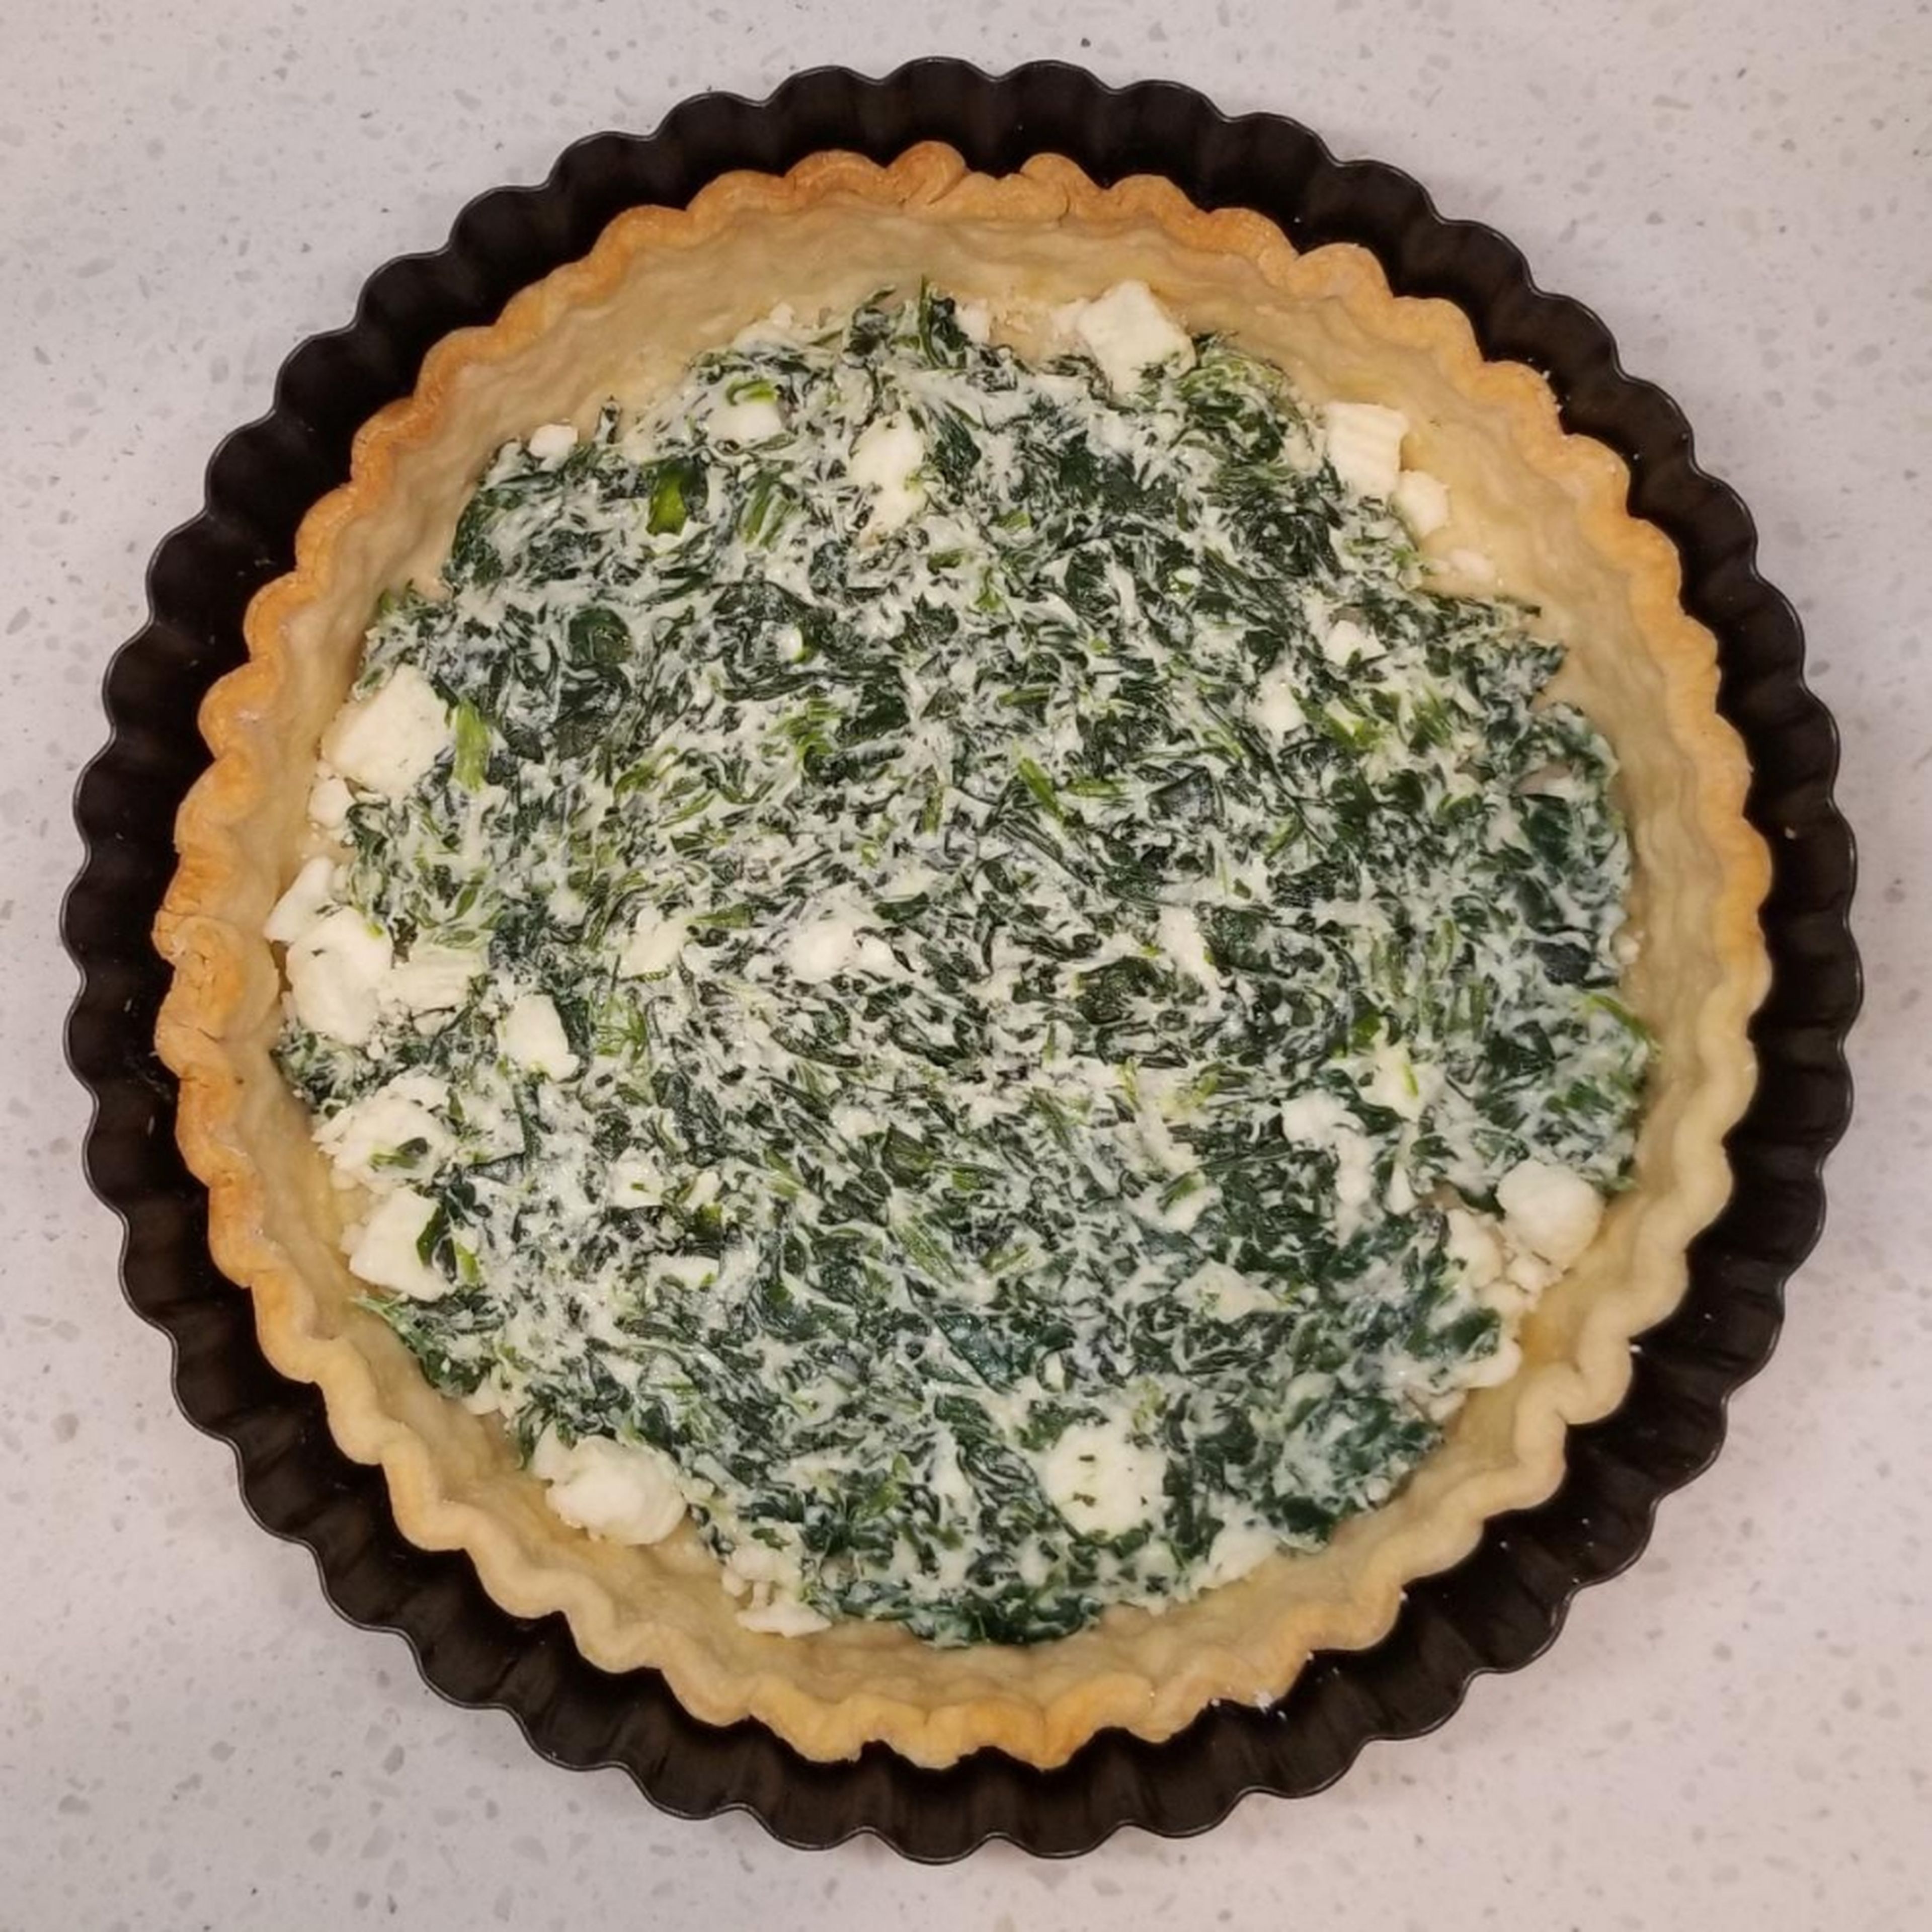 Spread spinach-cheese mixture along bottom of crust. Be sure to keep feta randomly dispersed below.